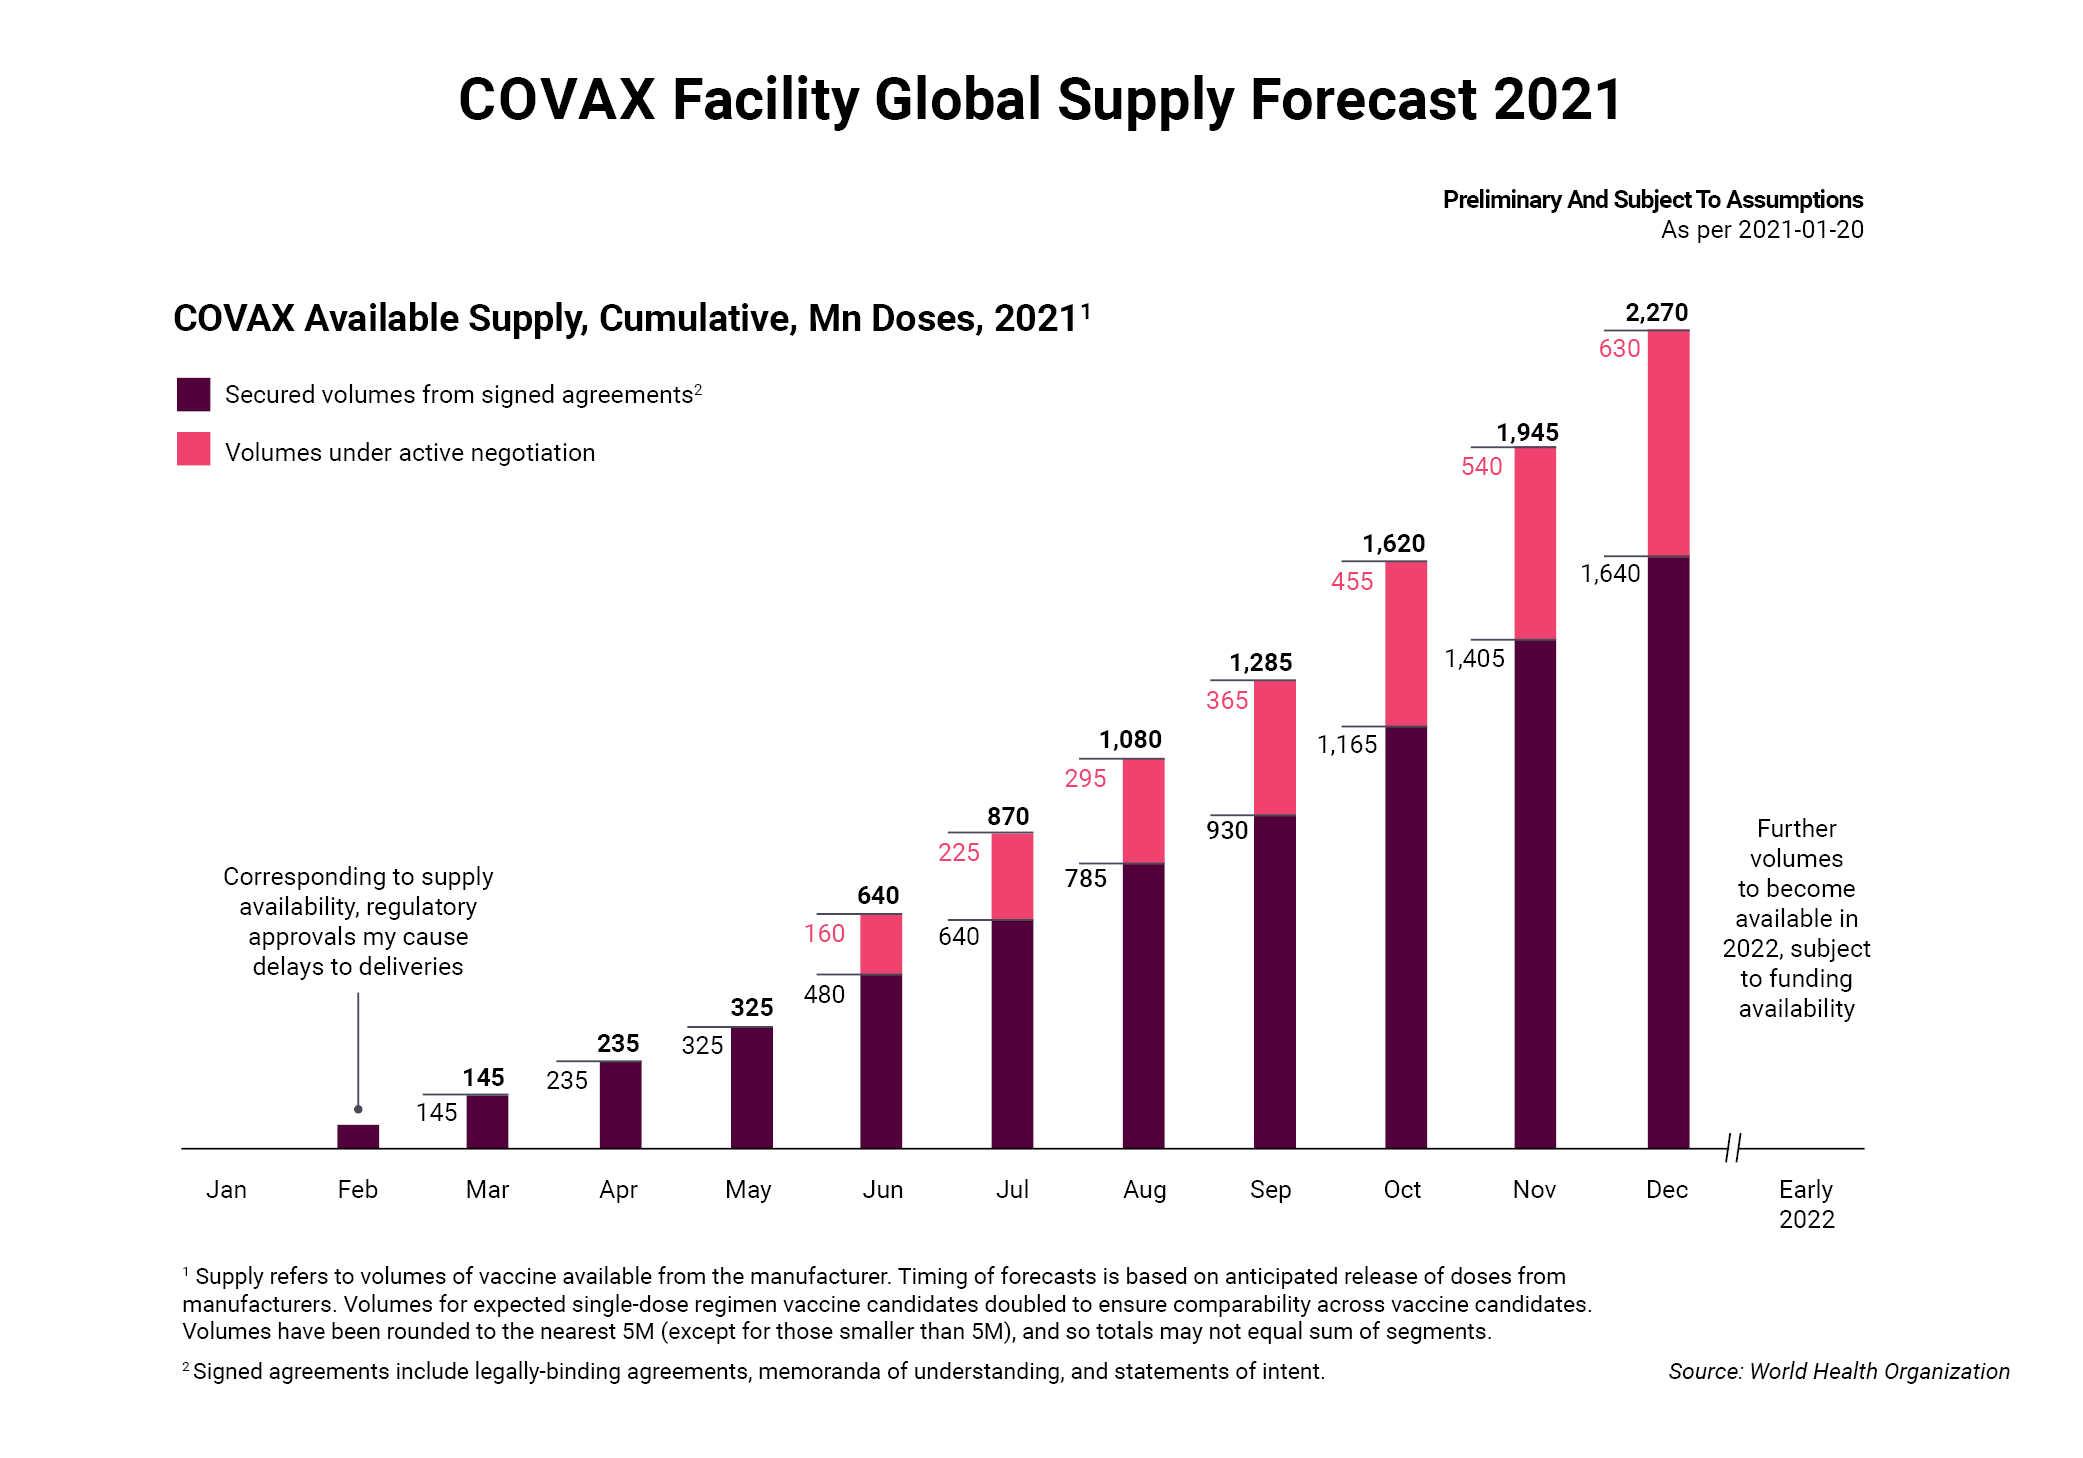 COVAX Facility Global Supply Forecast 2021